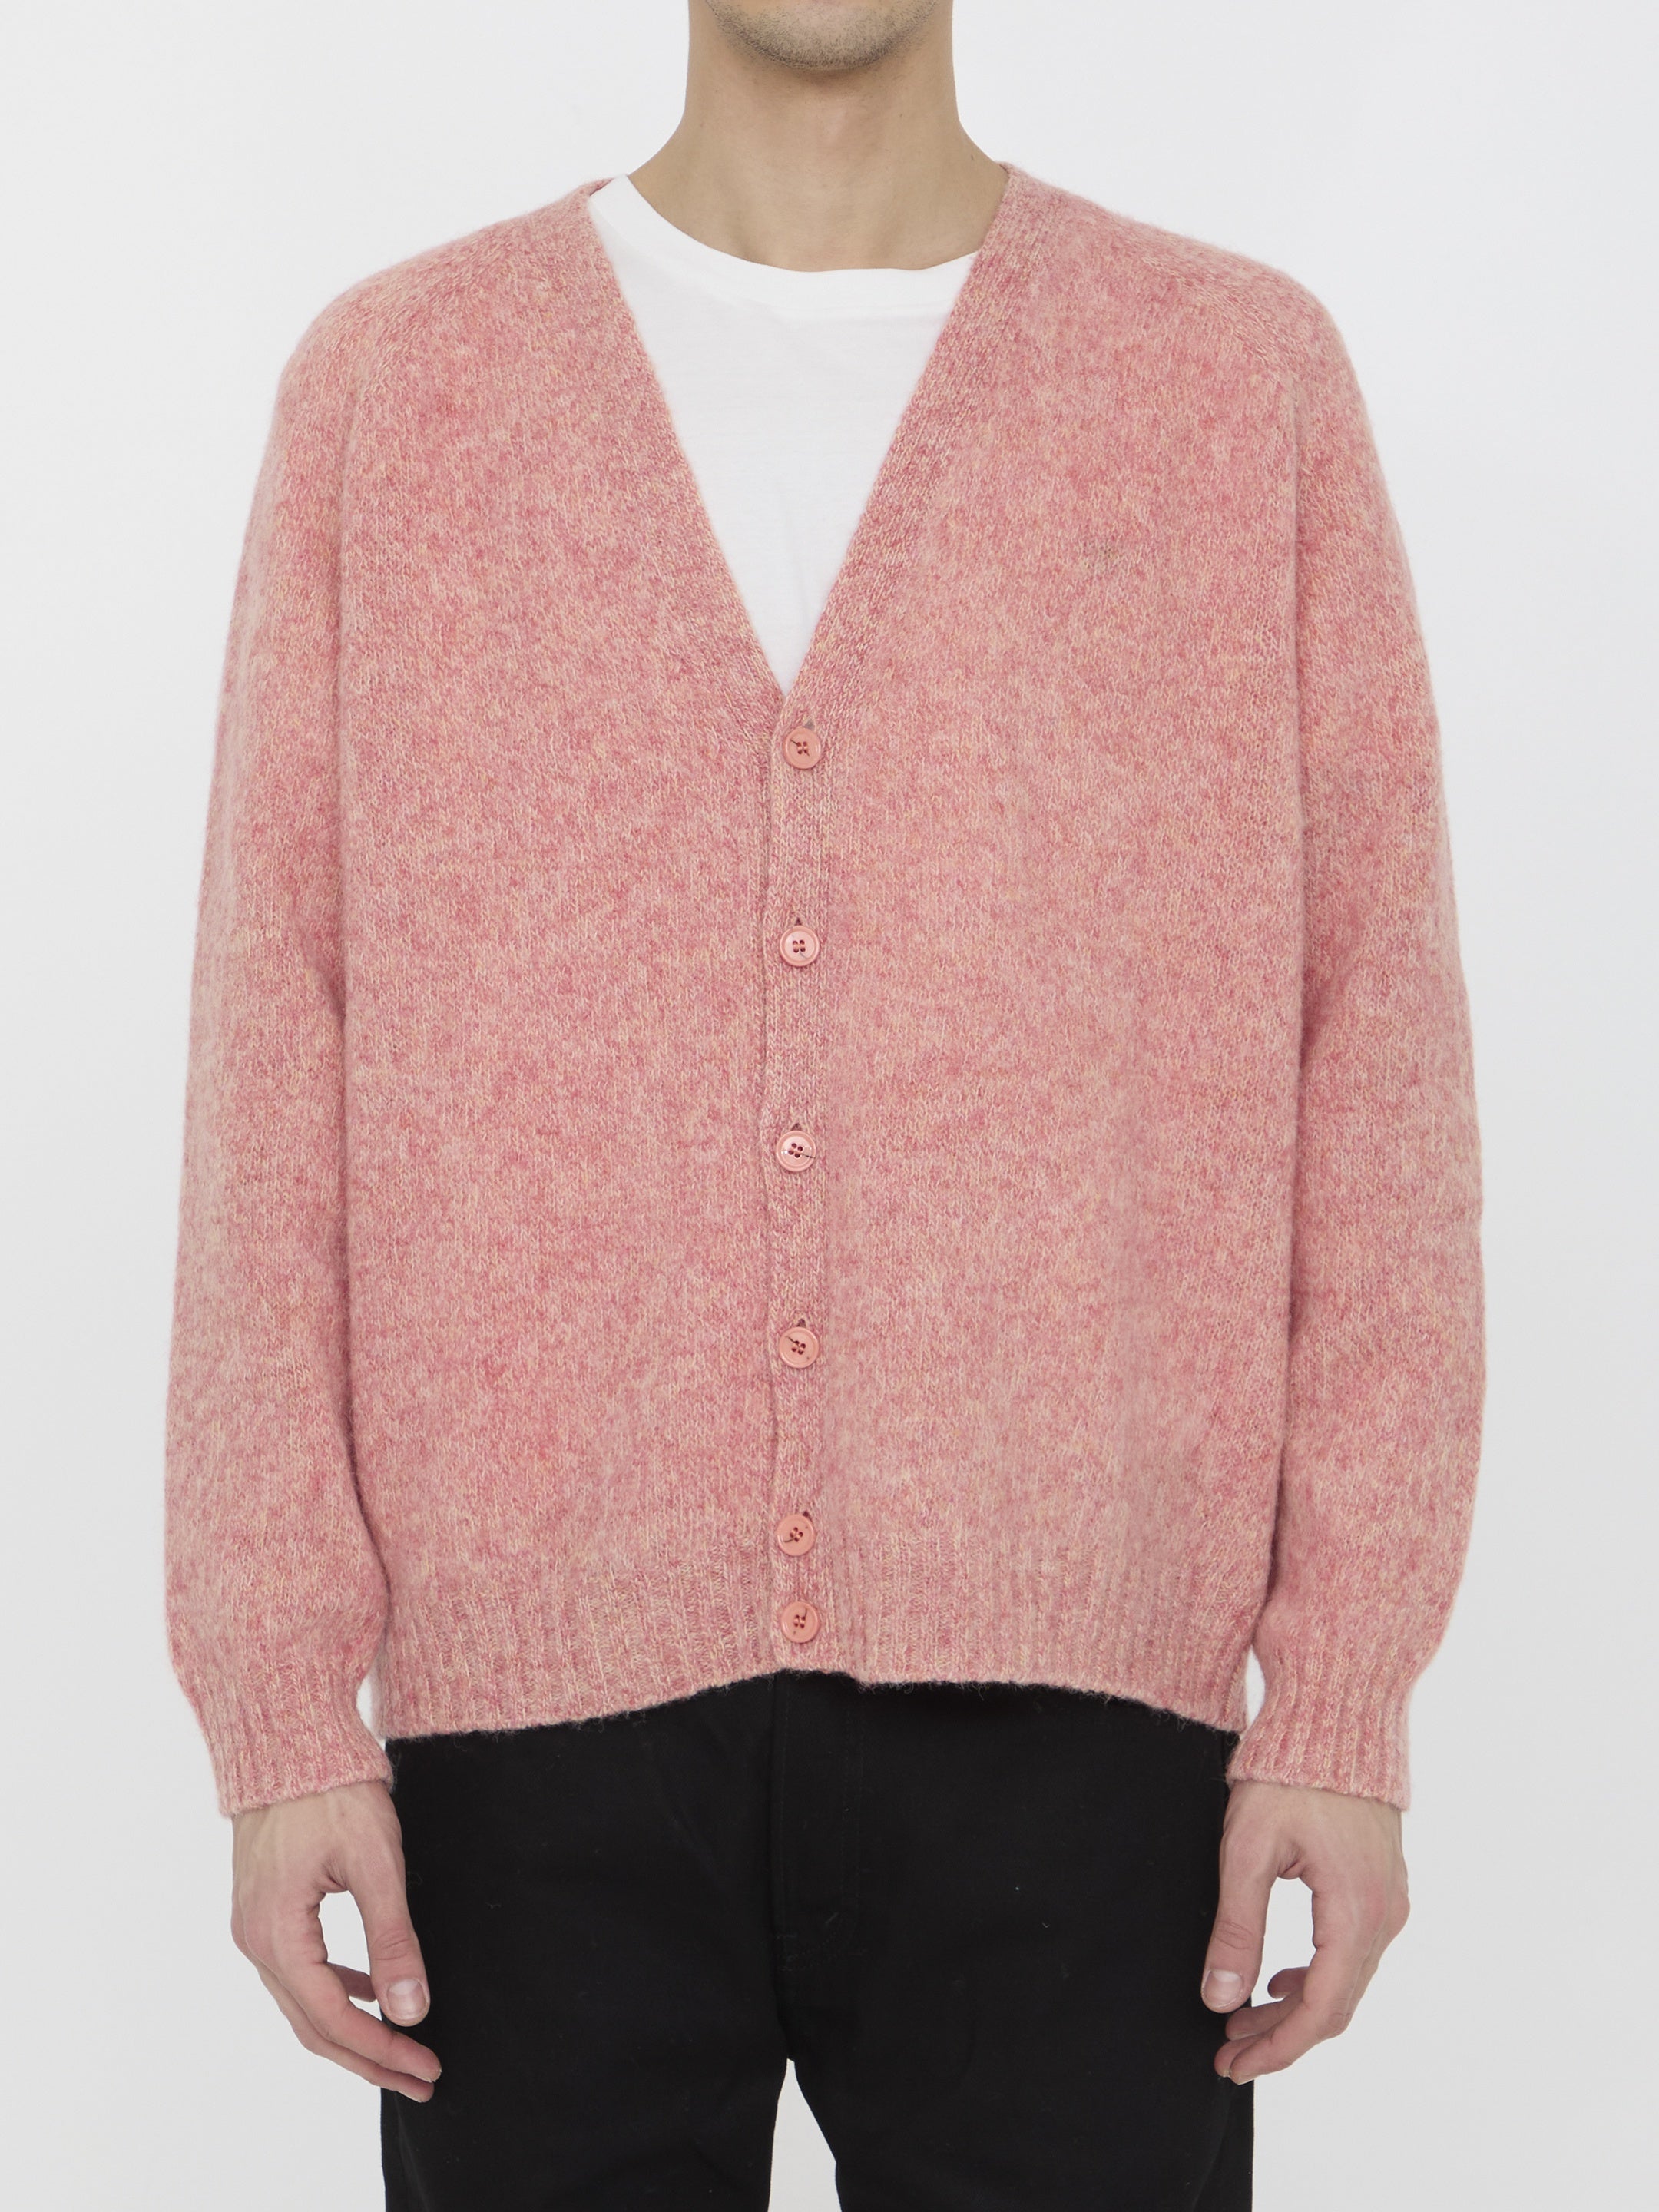 LOEWE-OUTLET-SALE-Wool-cardigan-Strick-M-PINK-ARCHIVE-COLLECTION.jpg